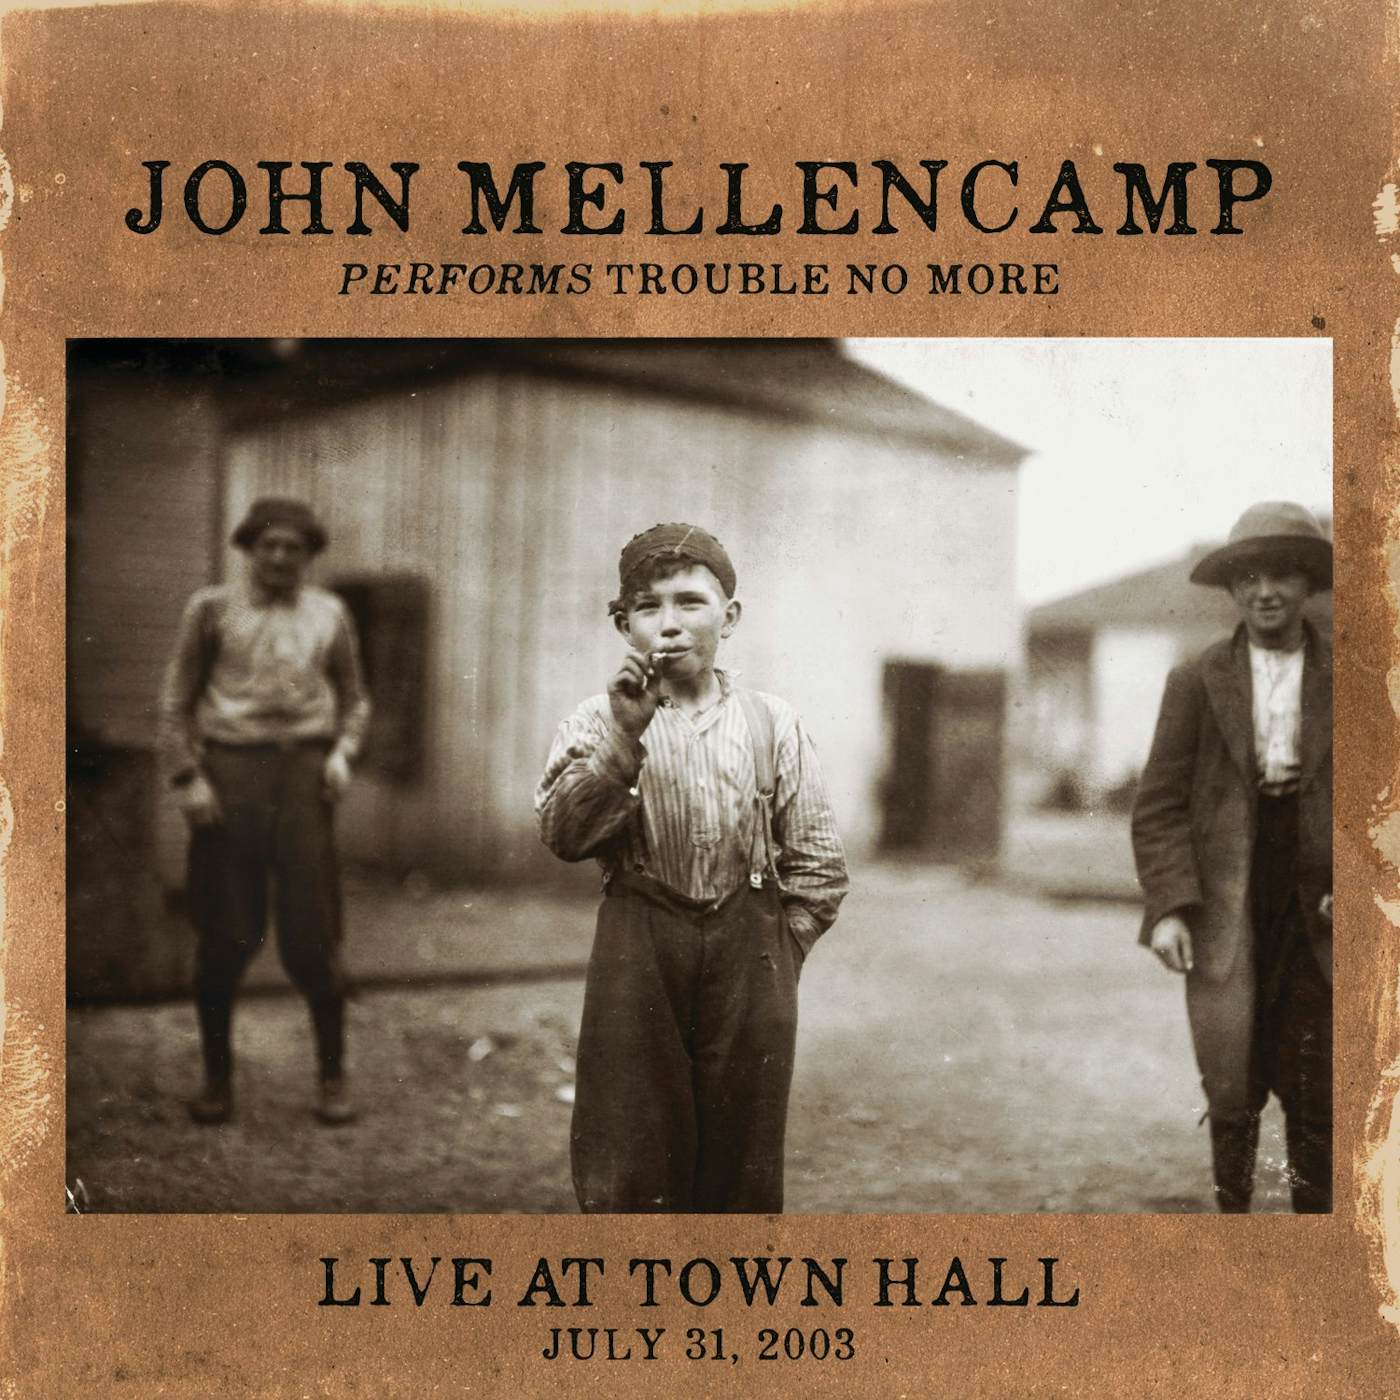 John Mellencamp Performs Trouble No More Live At Town Hall Vinyl Record